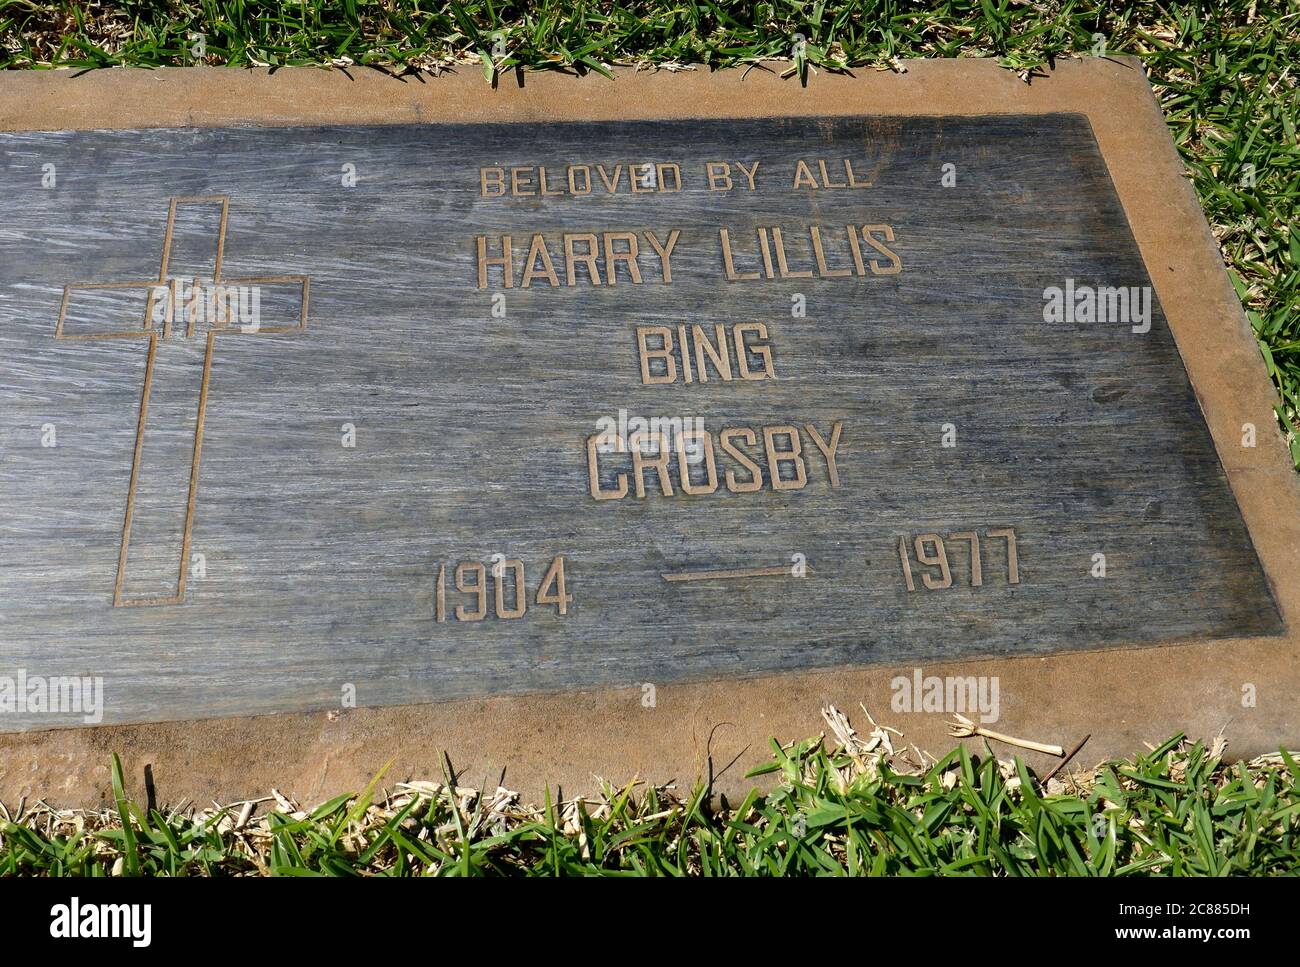 Culver City, California, USA 21st July 2020 A general view of atmosphere of Bing Crosby's Grave in Grotto Section at Holy Cross Cemetery on July 21, 2020 in Culver City, California, USA. Photo by Barry King/Alamy Stock Photo Stock Photo